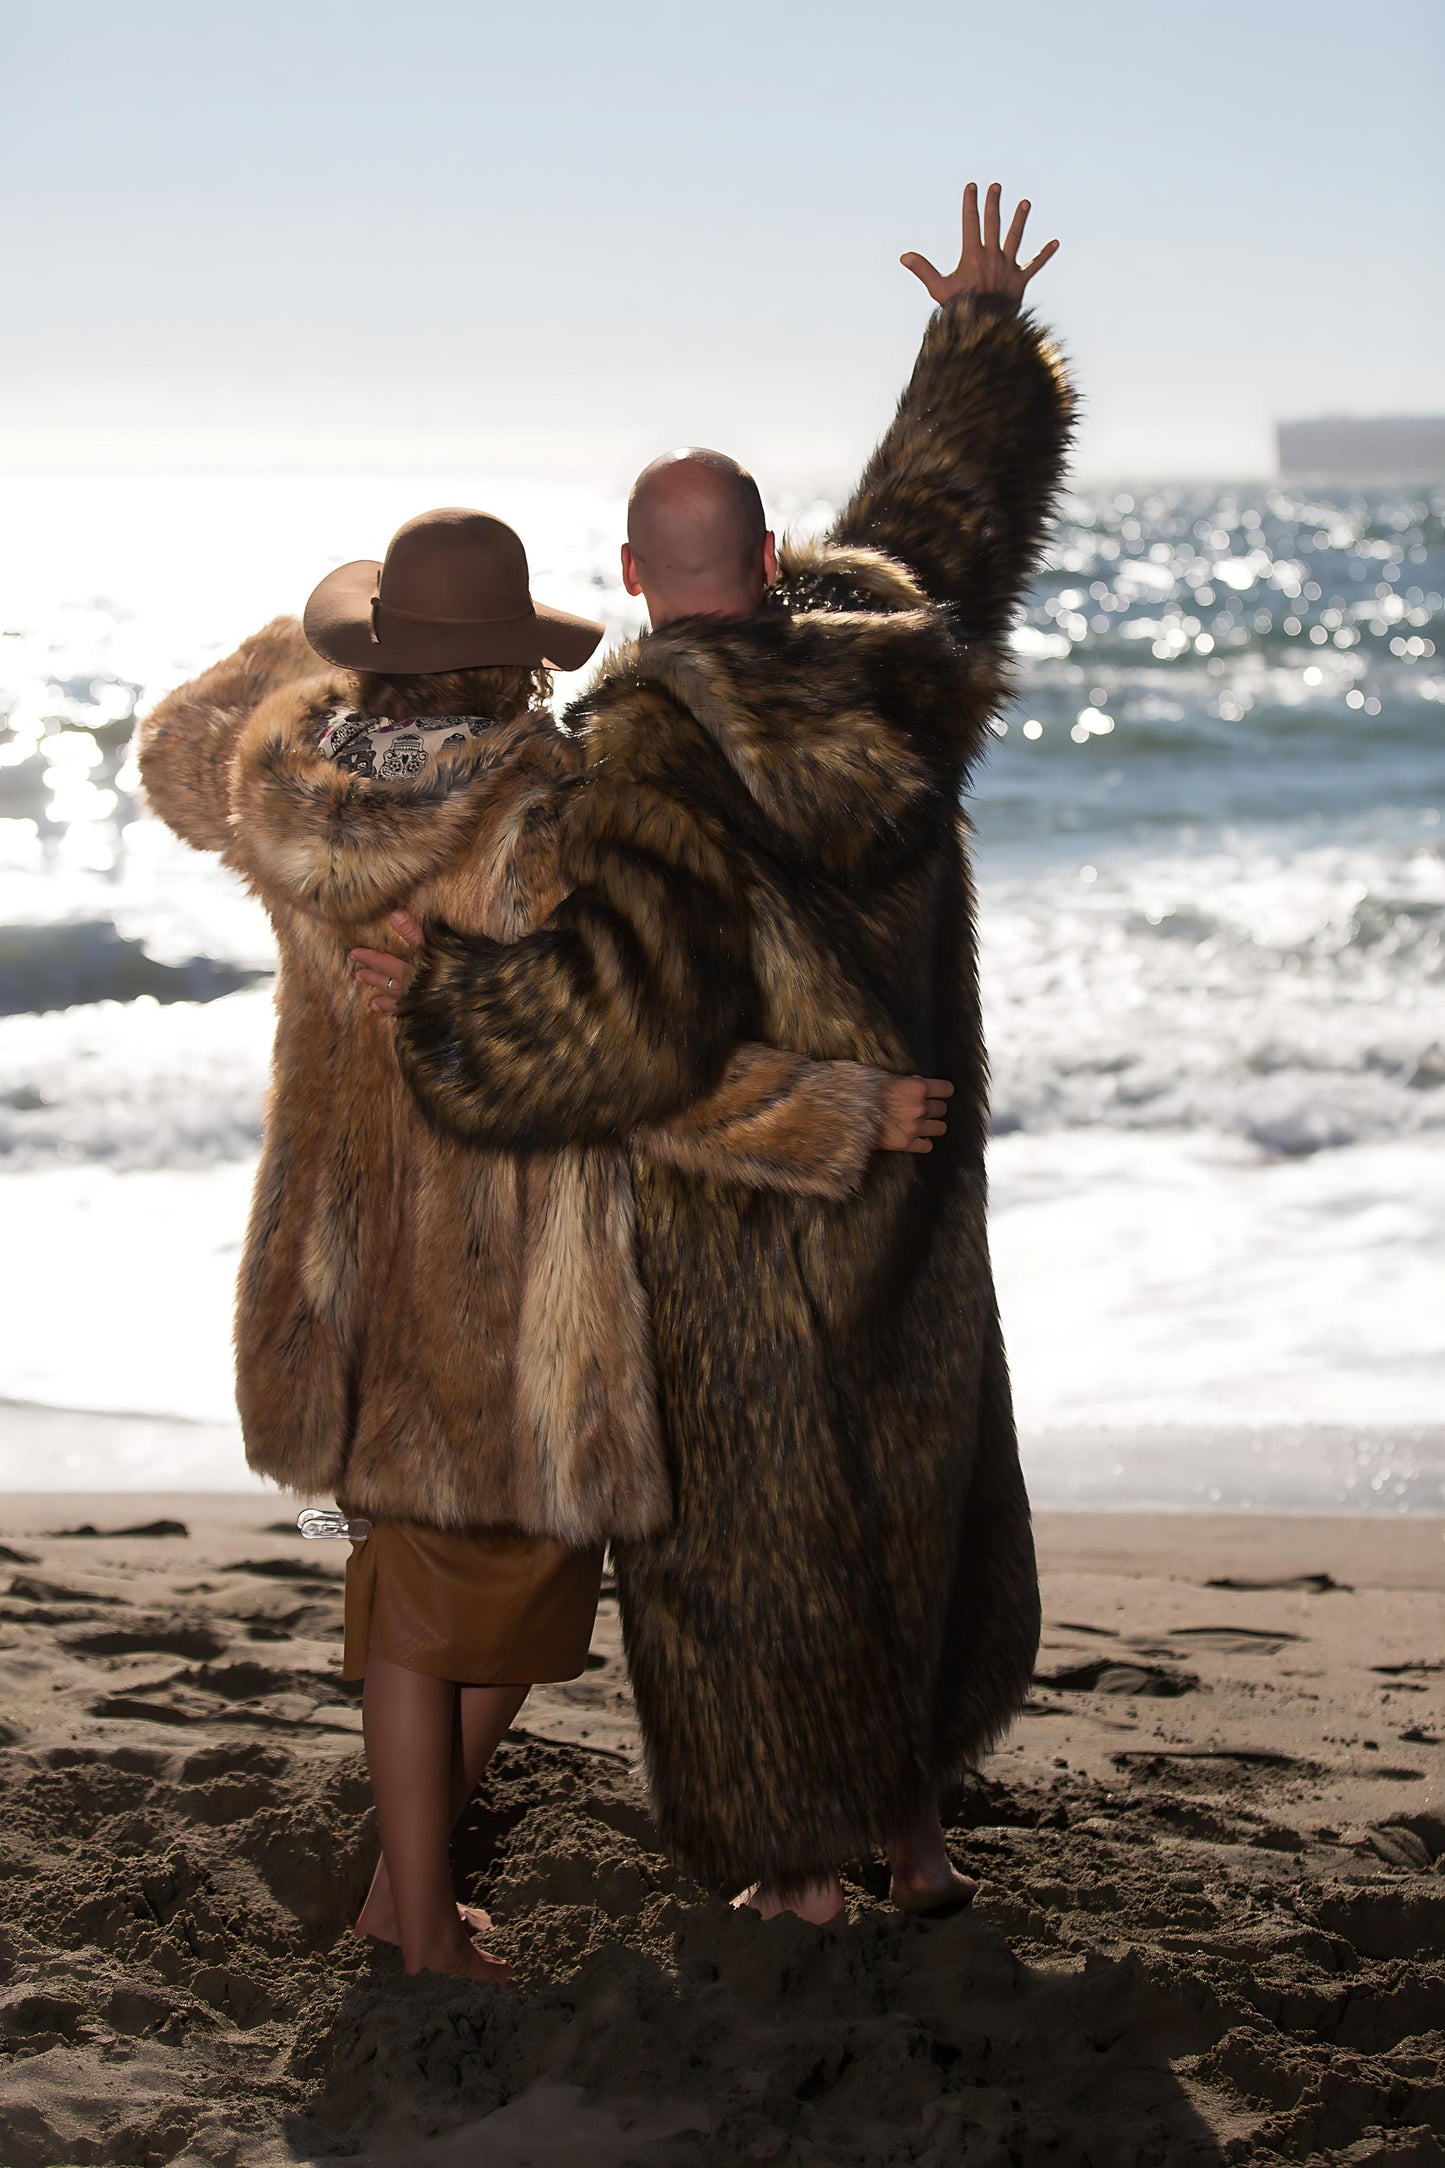 Two kindred spirits in majestic faux fur coats embrace the wild call of the ocean, their hearts in unison with the rhythmic waves, celebrating the unity of man and nature.